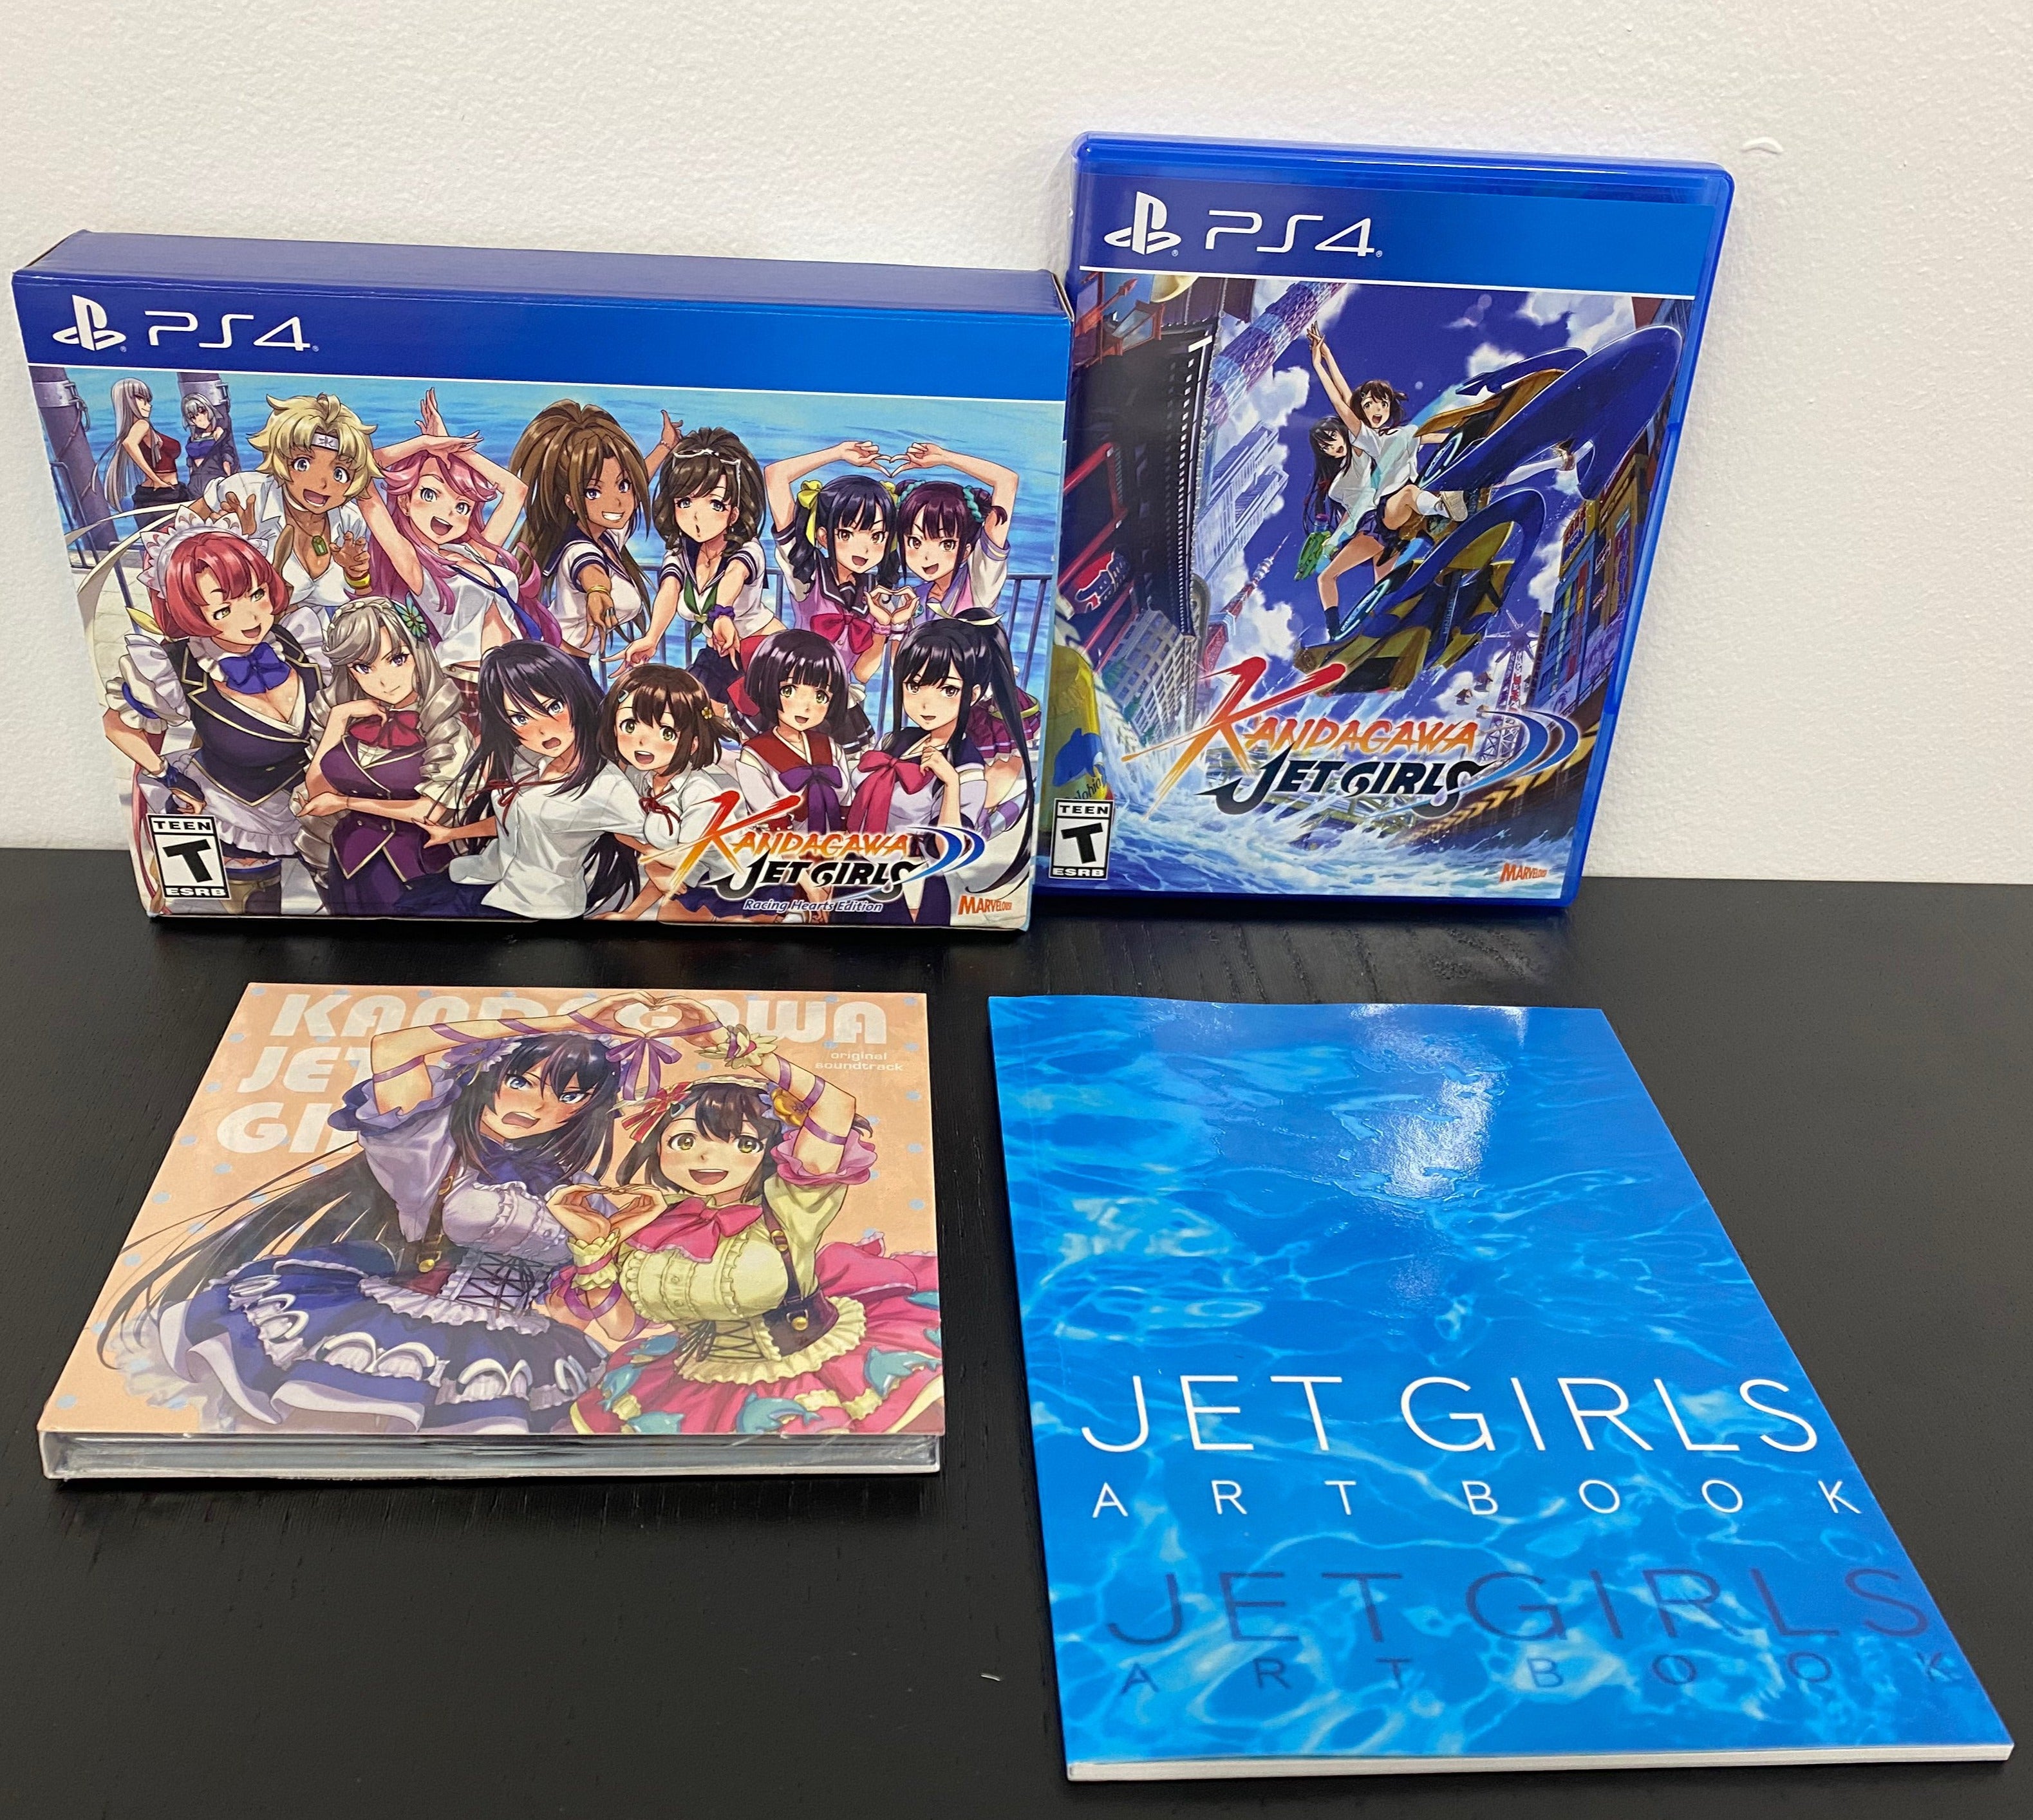 Kandagawa Jet Girls - Racing Hearts Edition (Day 1) -  (PS4) PlayStation 4 [UNBOXING] Video Games Xseed   